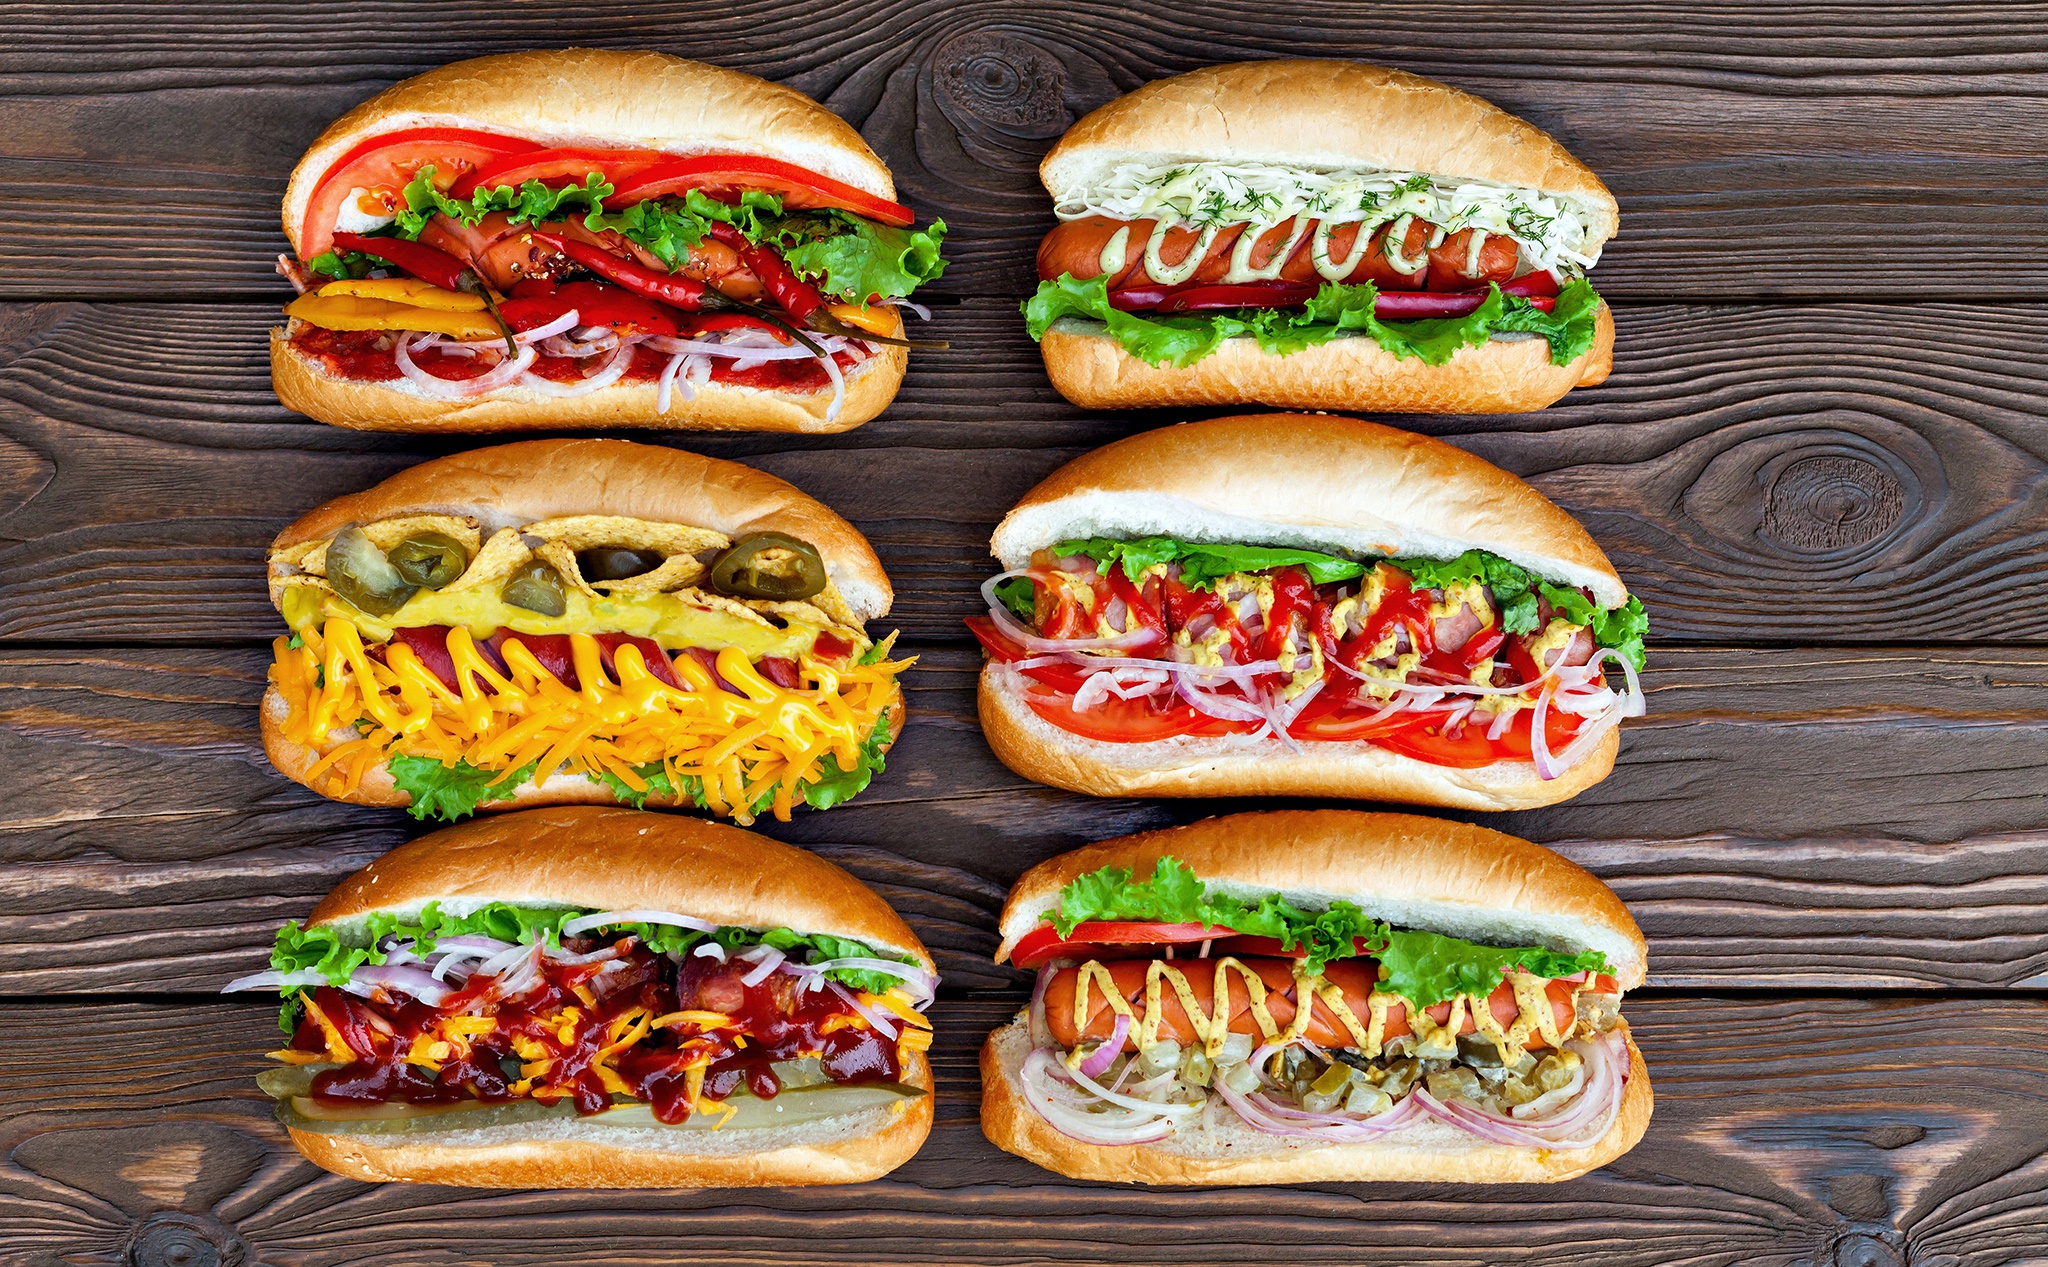 General 2048x1267 food sandwiches hot dogs jalapenos cheese onion tomatoes lettuce chips pepper mustard top view wooden surface closeup